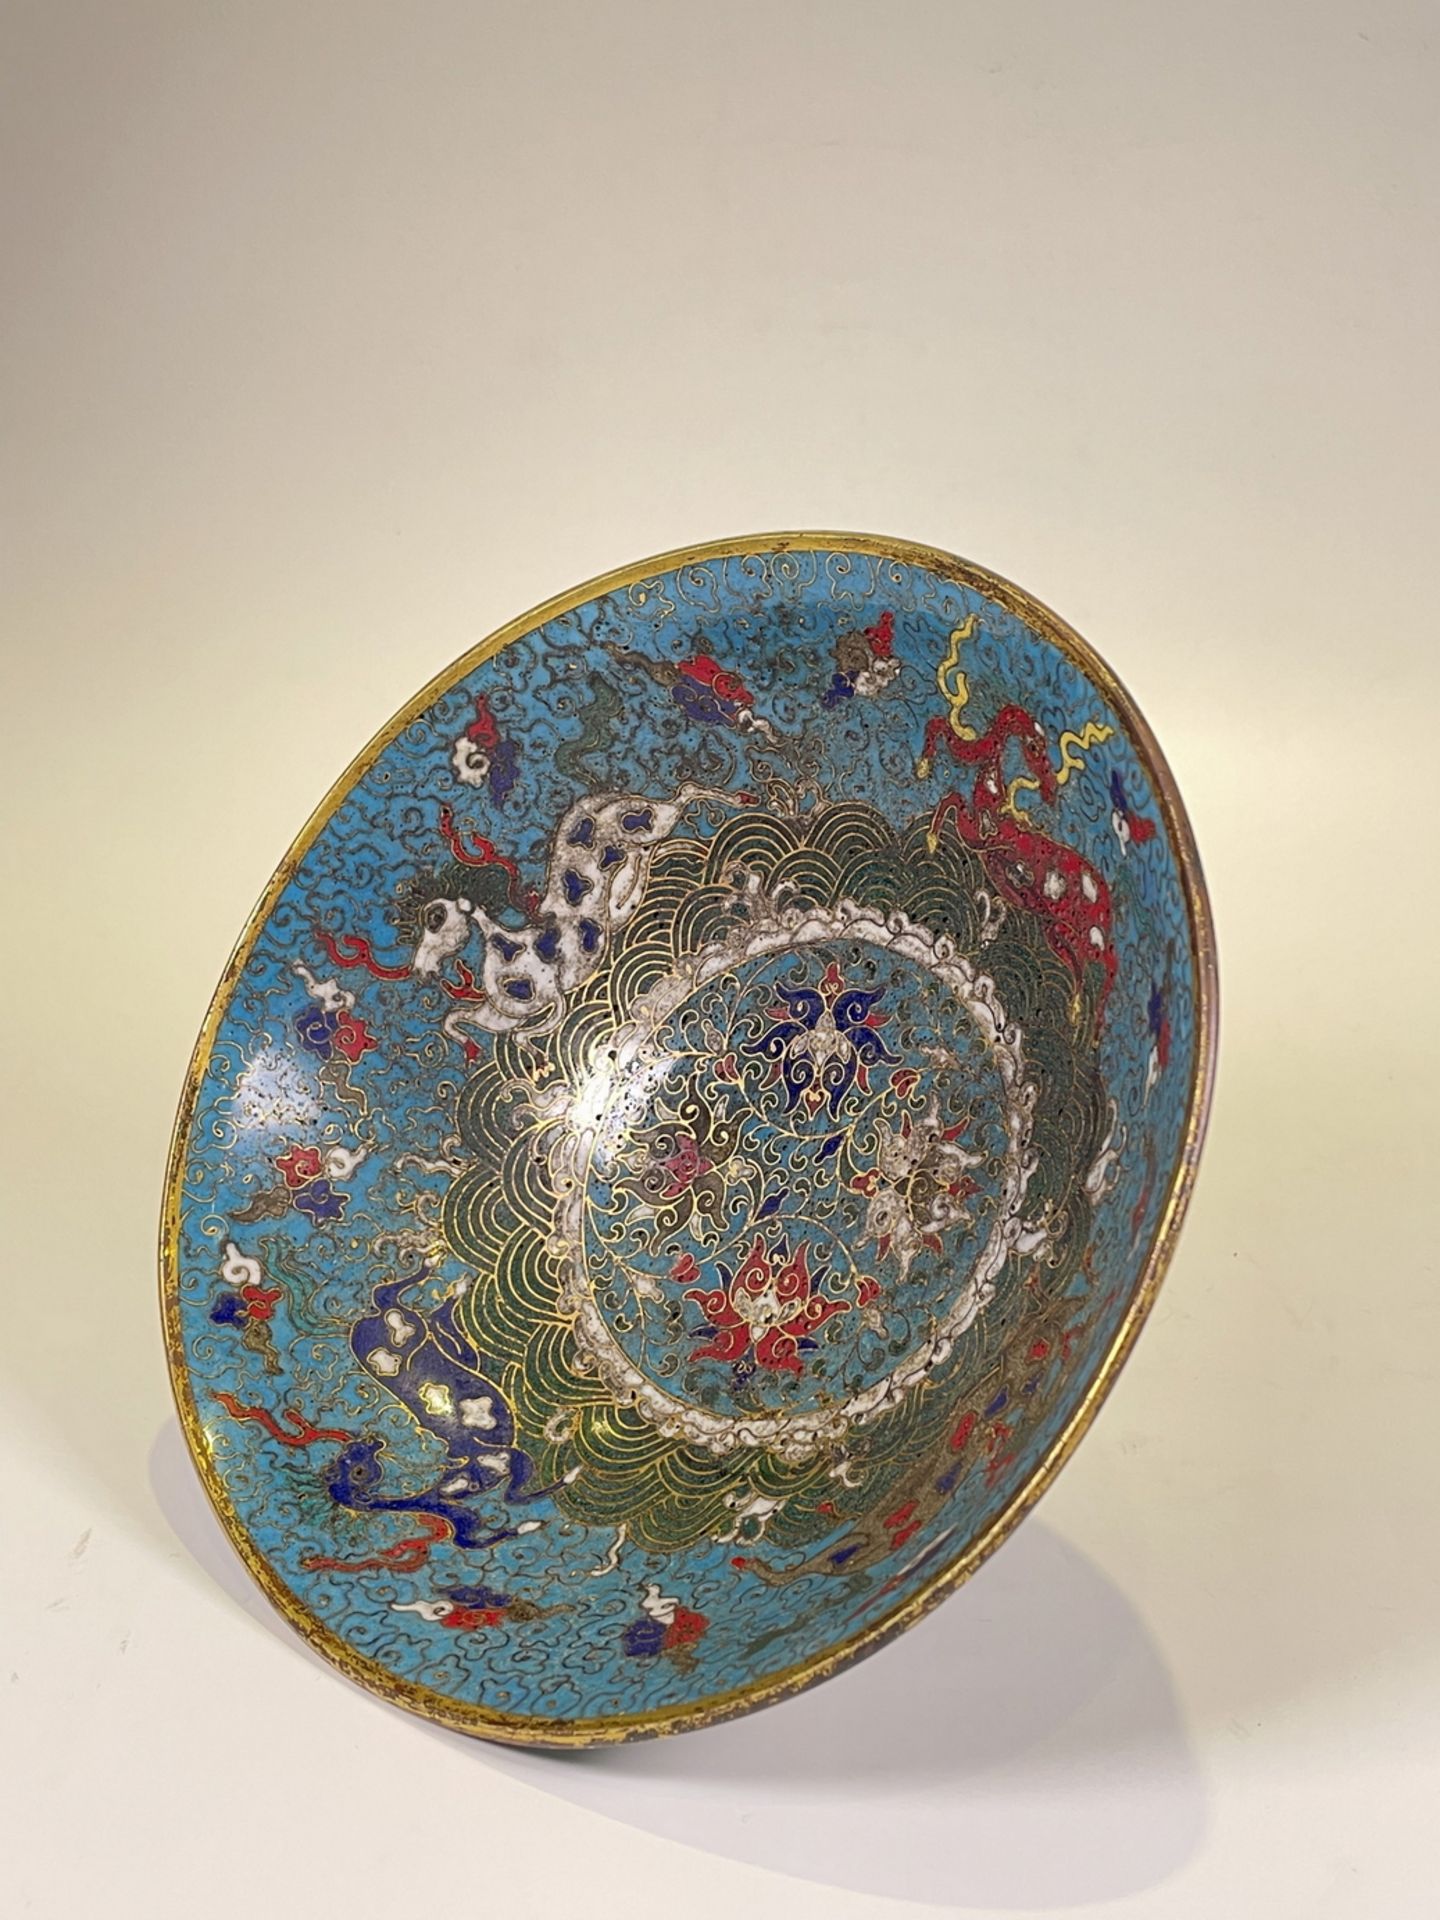 FINE CHINESE CLOISONNE, 17TH/18TH Century Pr.  Collection of NARA private gallary.  - Image 4 of 11